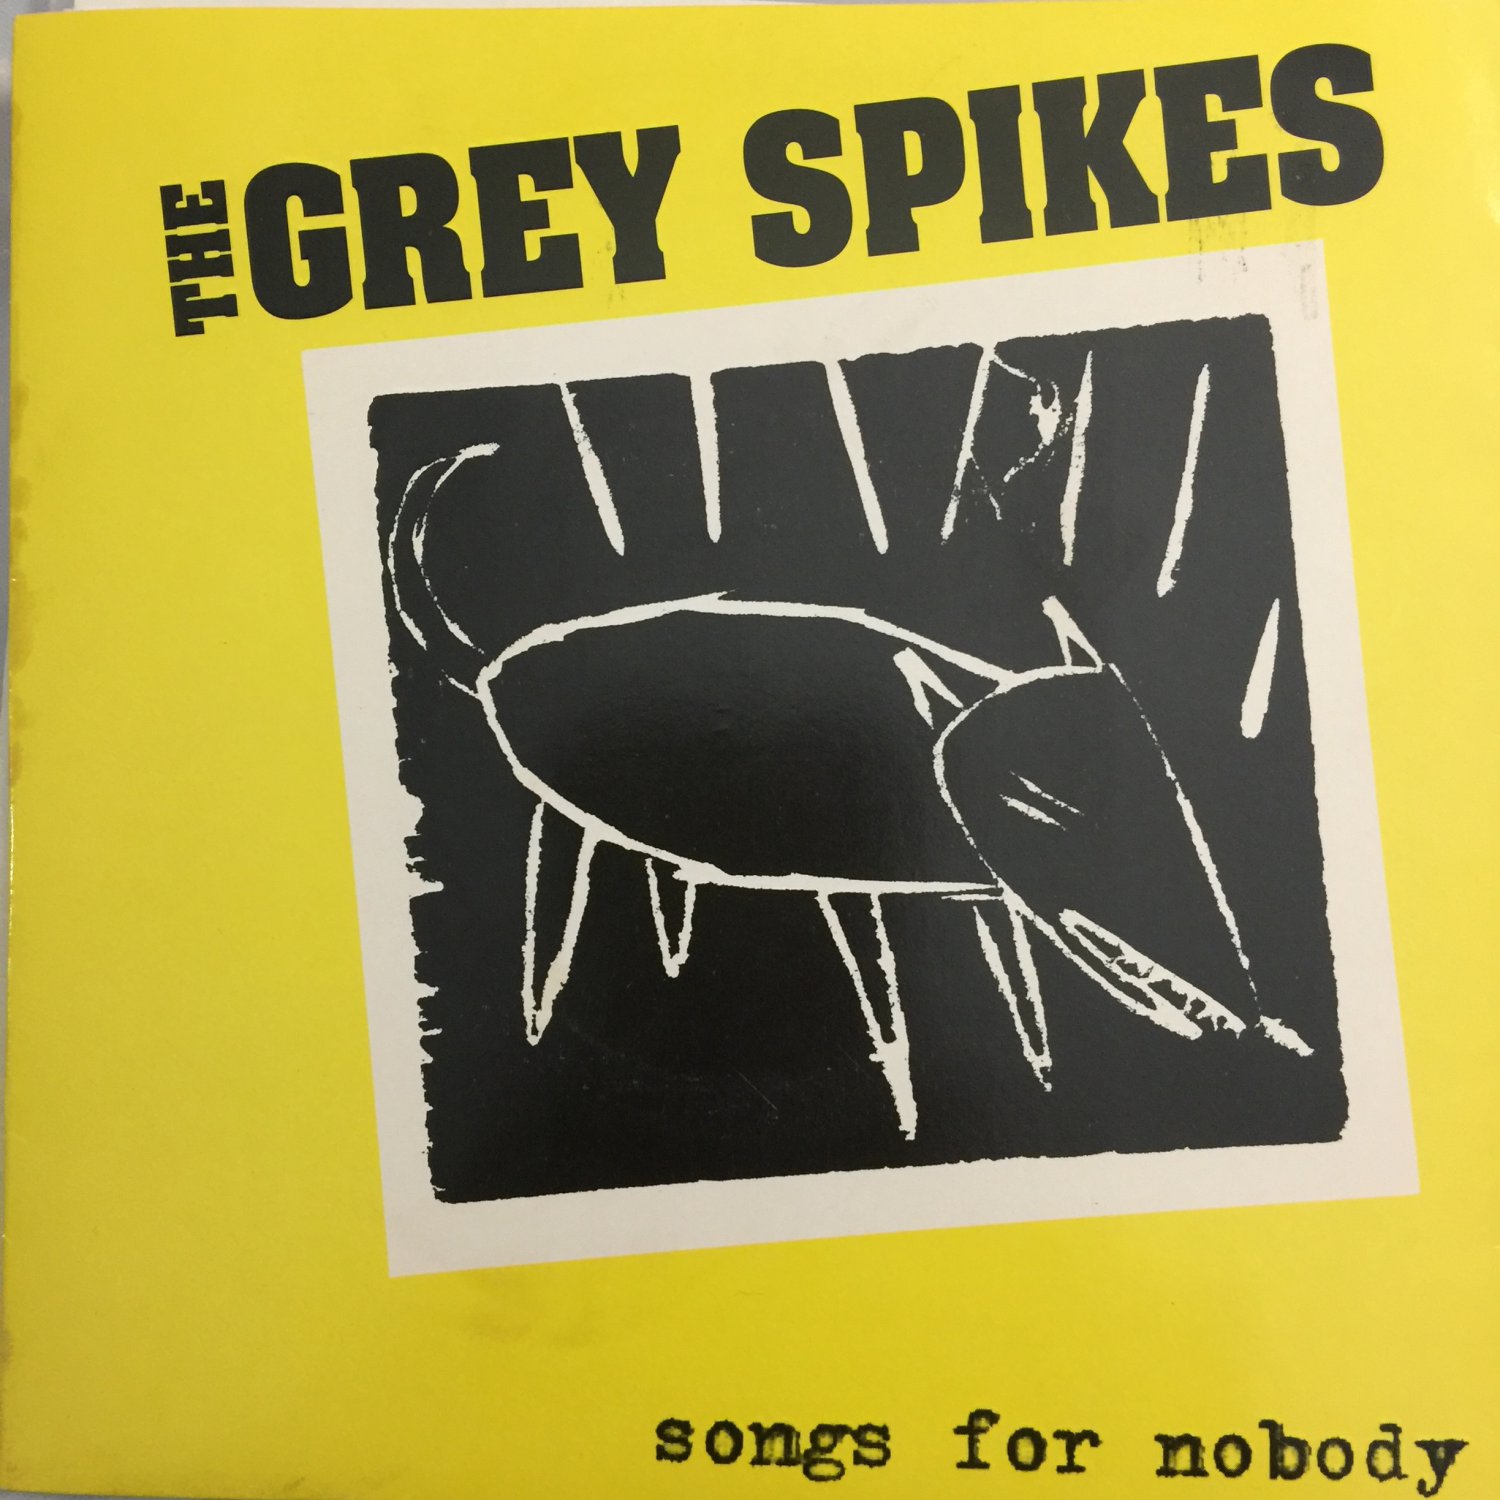 VGR002 - The Grey Spikes - Songs For Nobody (7") VITAL GESTURE RECORDS